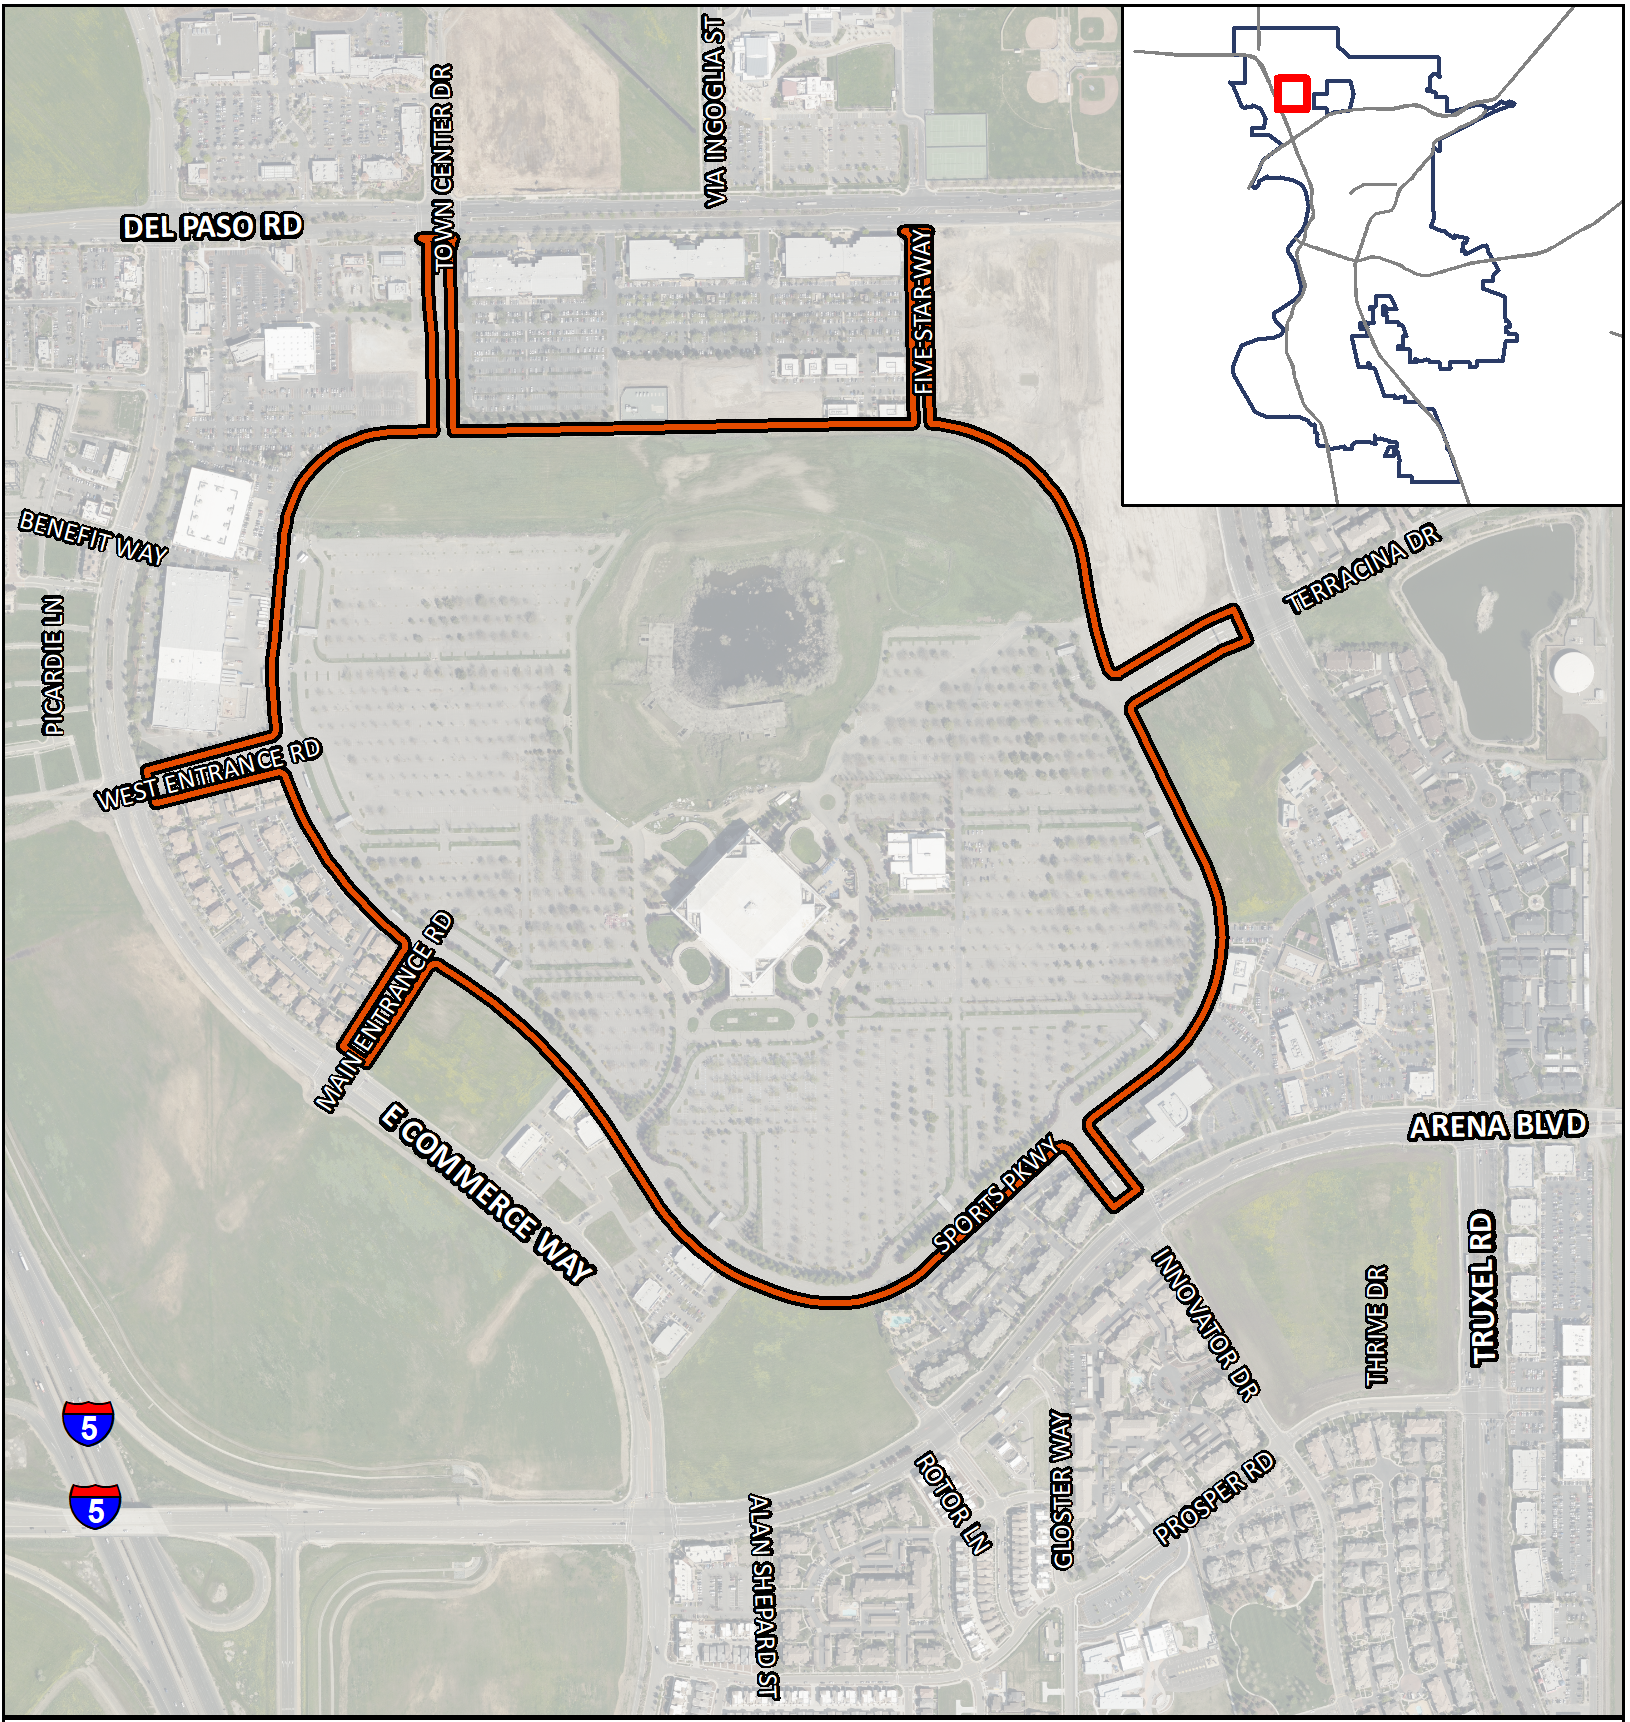 An aerial map of the Innovation Park Planned Unit Development laying out the boundaries of where the project will develop. It outlines in orange the boundary of Sports Pkwy with major cross streets of Arena Blvd and Truxel Rd as well as E Commerce and Del Paso. 